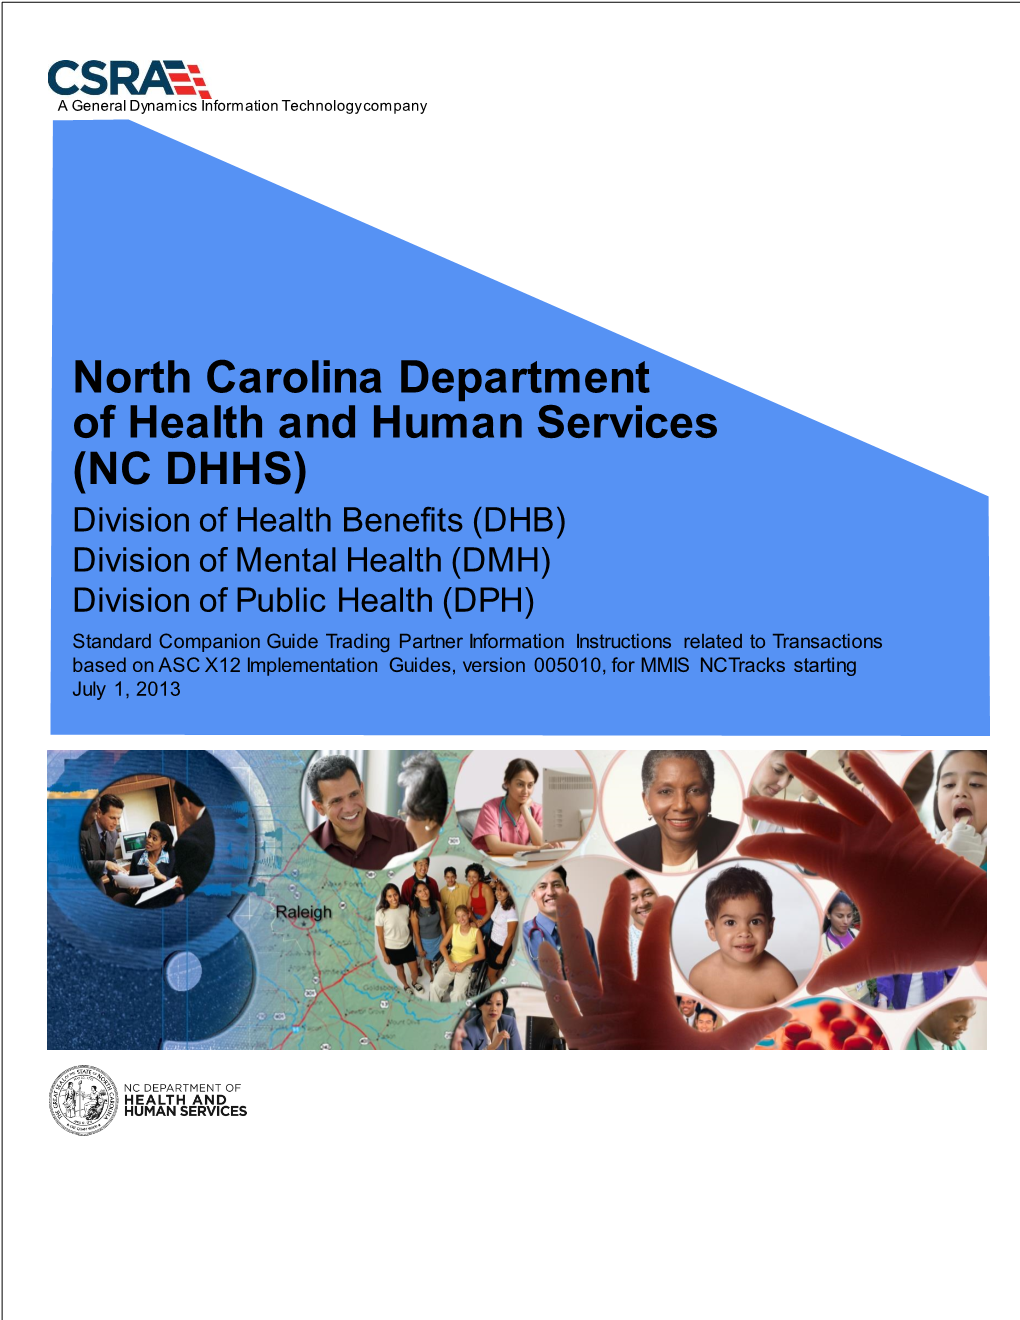 North Carolina Department of Health and Human Services (NC DHHS)